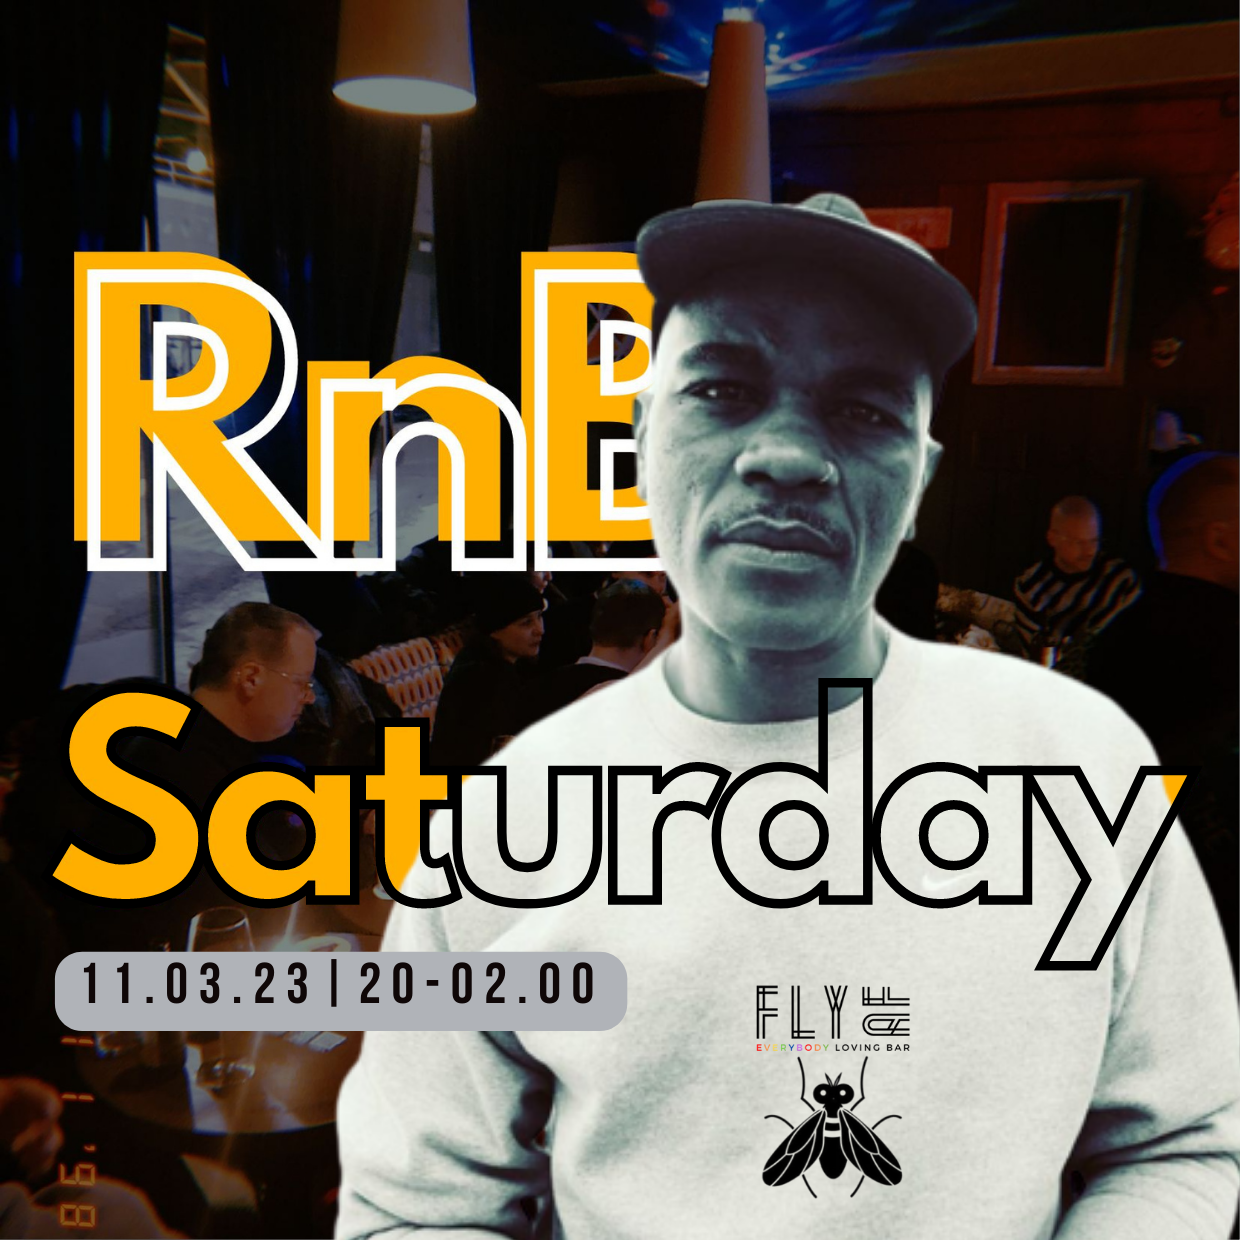 Hey party people! We're excited to announce our upcoming RnB weekend 11.03.23 party at Fly AF Bar!